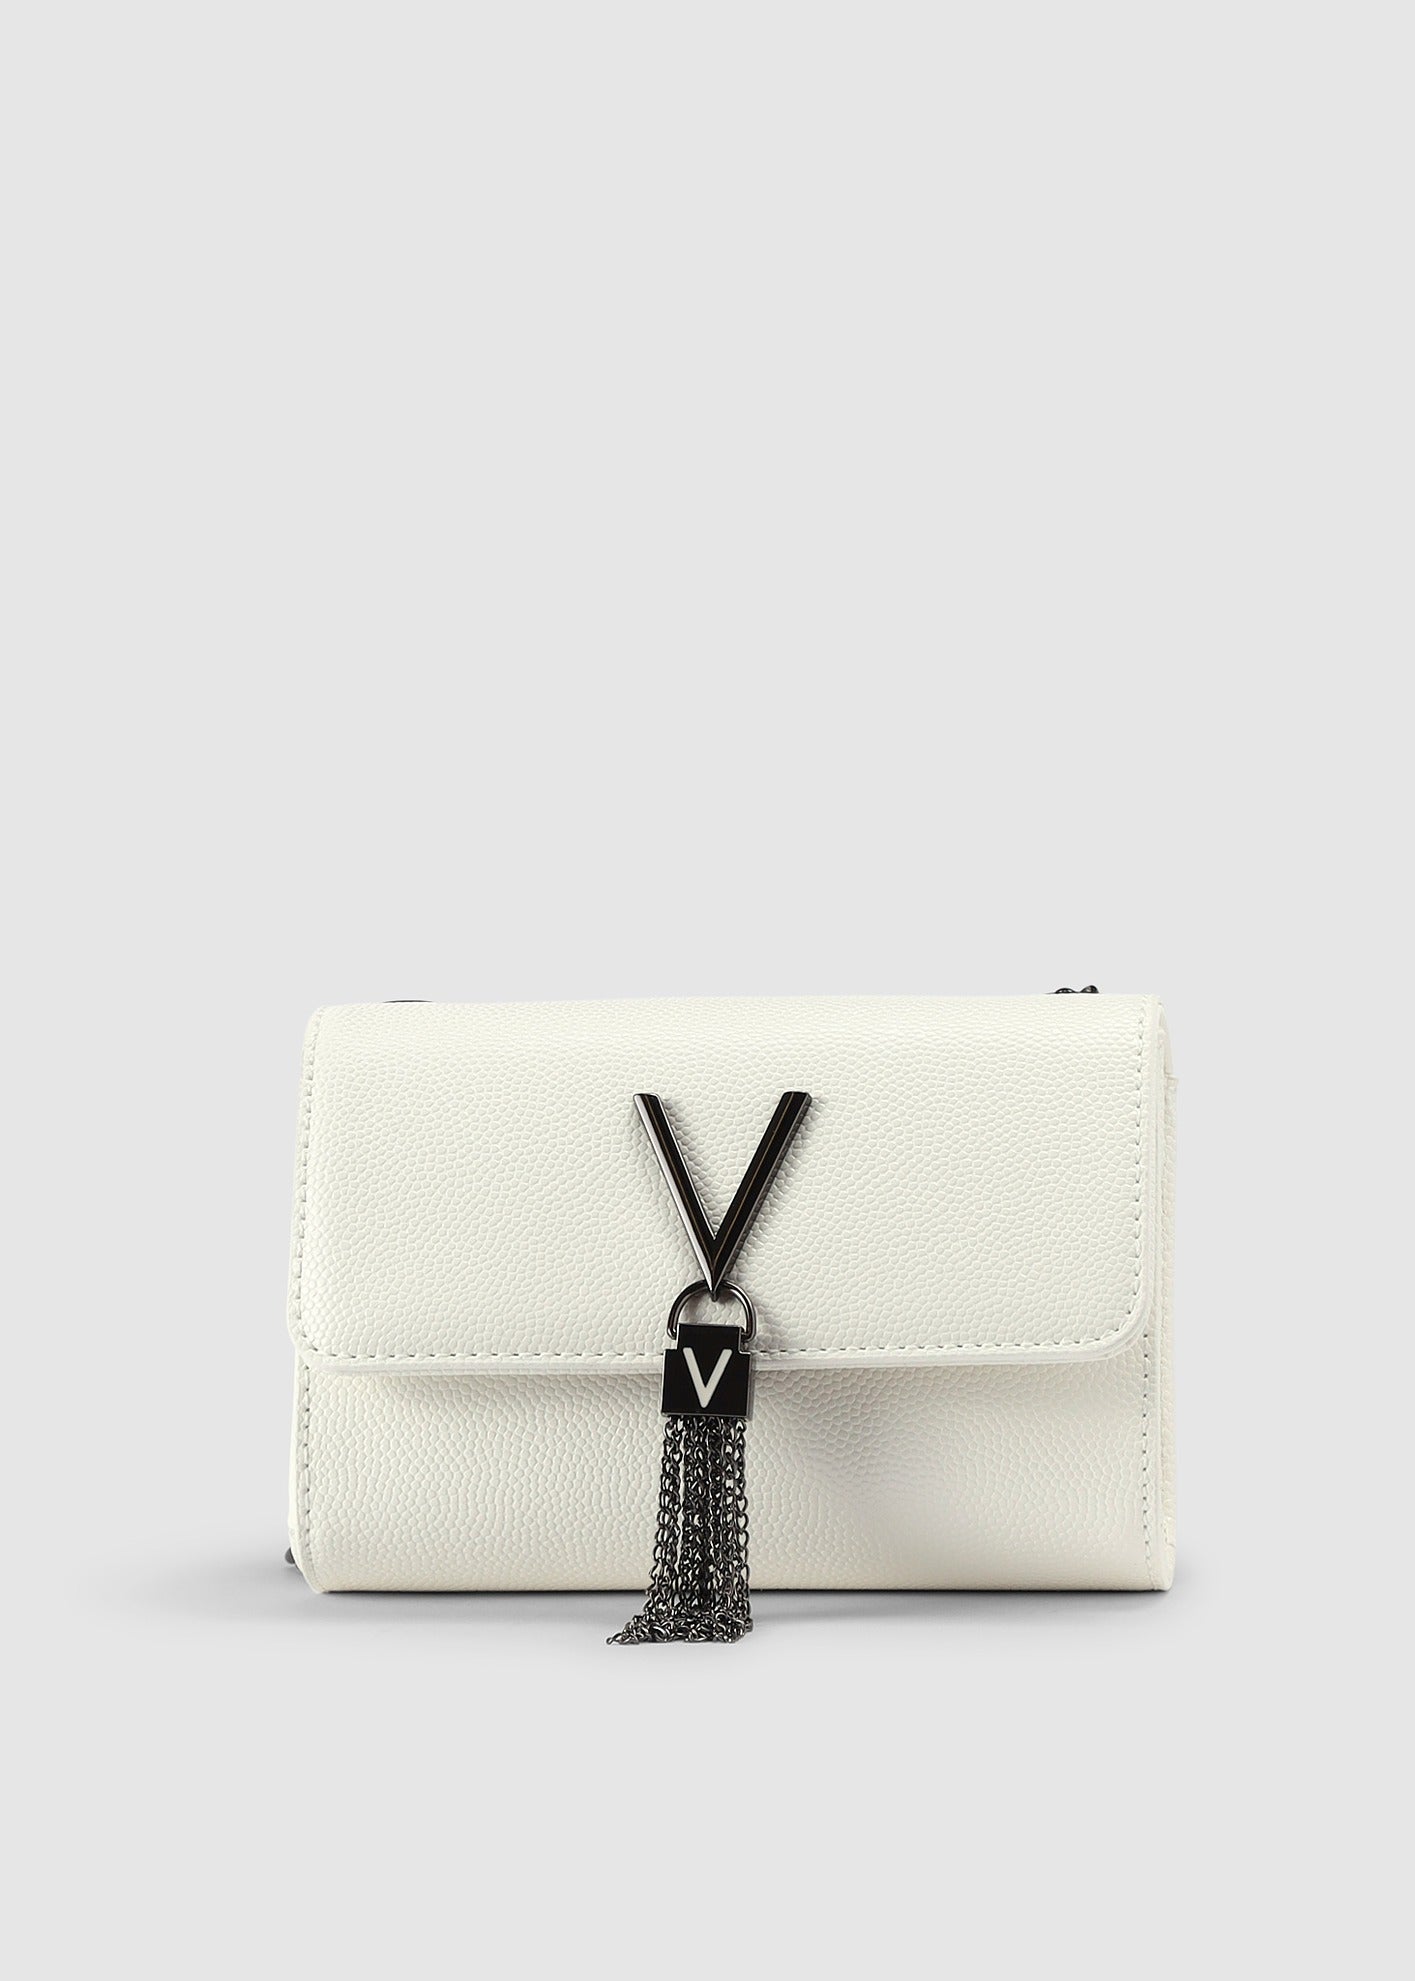 Valentino Bags Womens Divina Small Fold Over Clutch Bag With Chain Strap In Bianco/Gunmetal